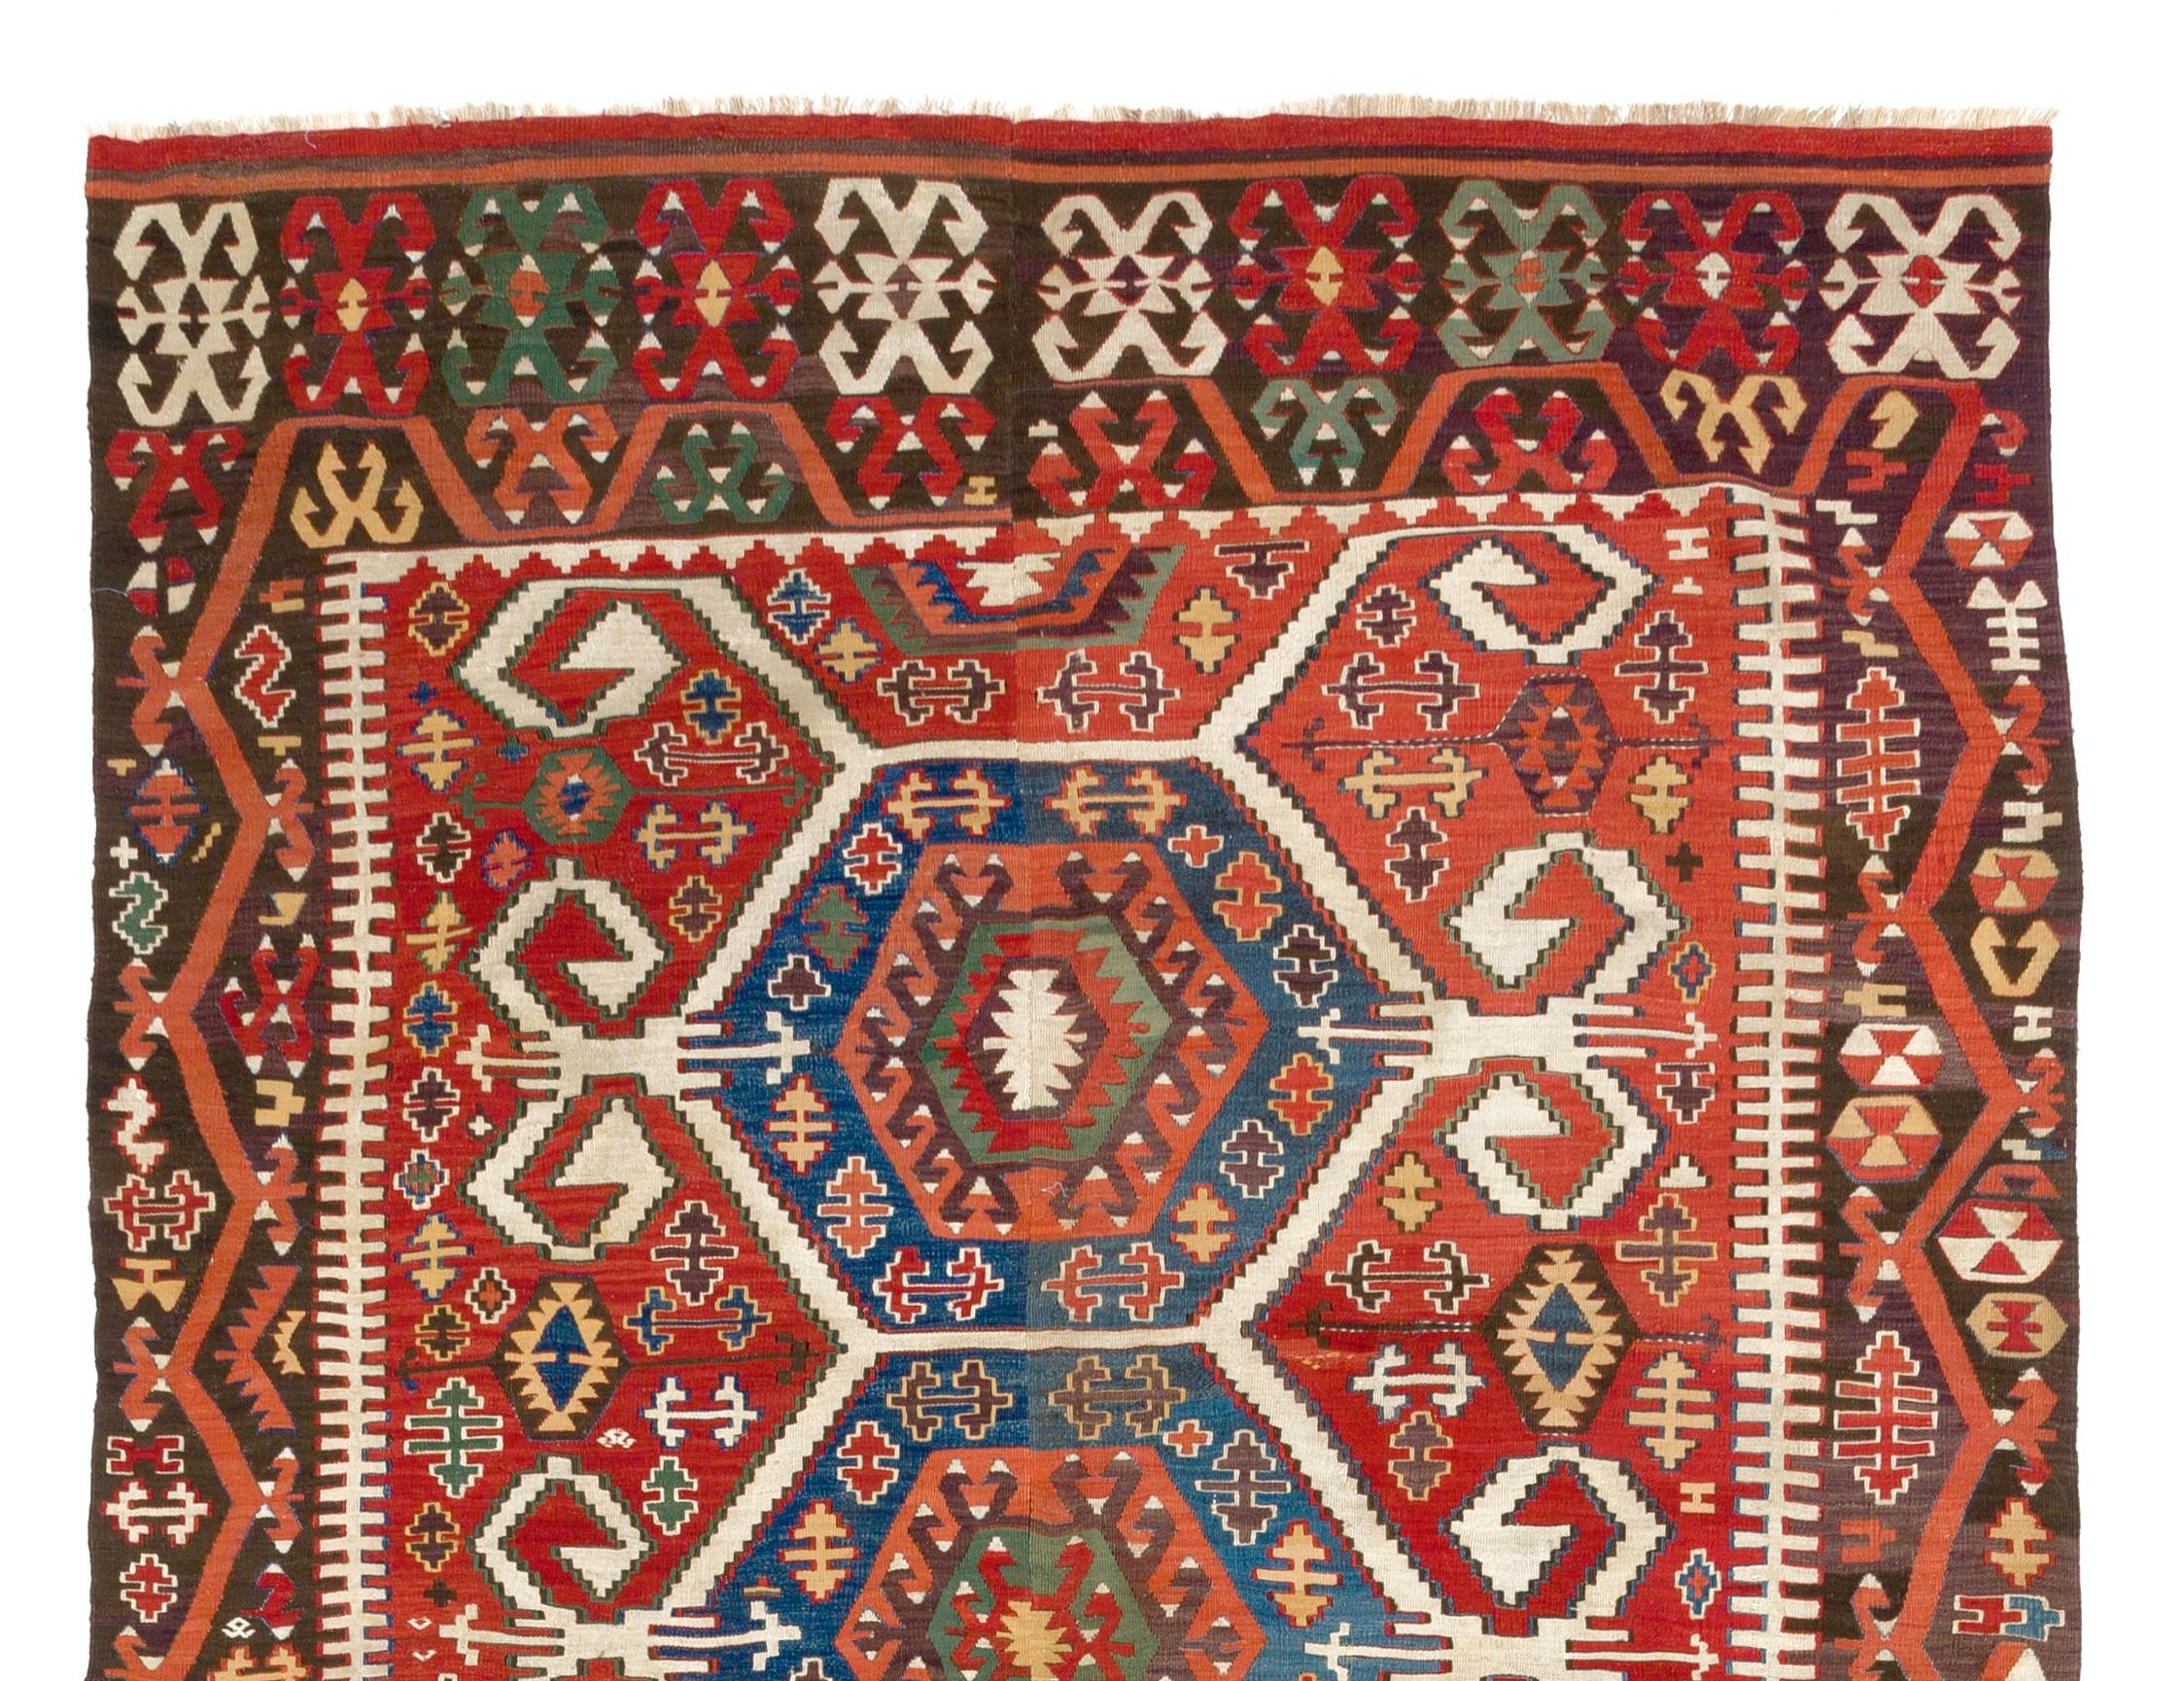 A splendid antique Kilim flat-woven rug from Central Anatolia in excellent condition. Traditionally the rug is finely handwoven in two panels and connected in the centre, it is made of wool and the colors are all sourced from natural vegetal dyes.